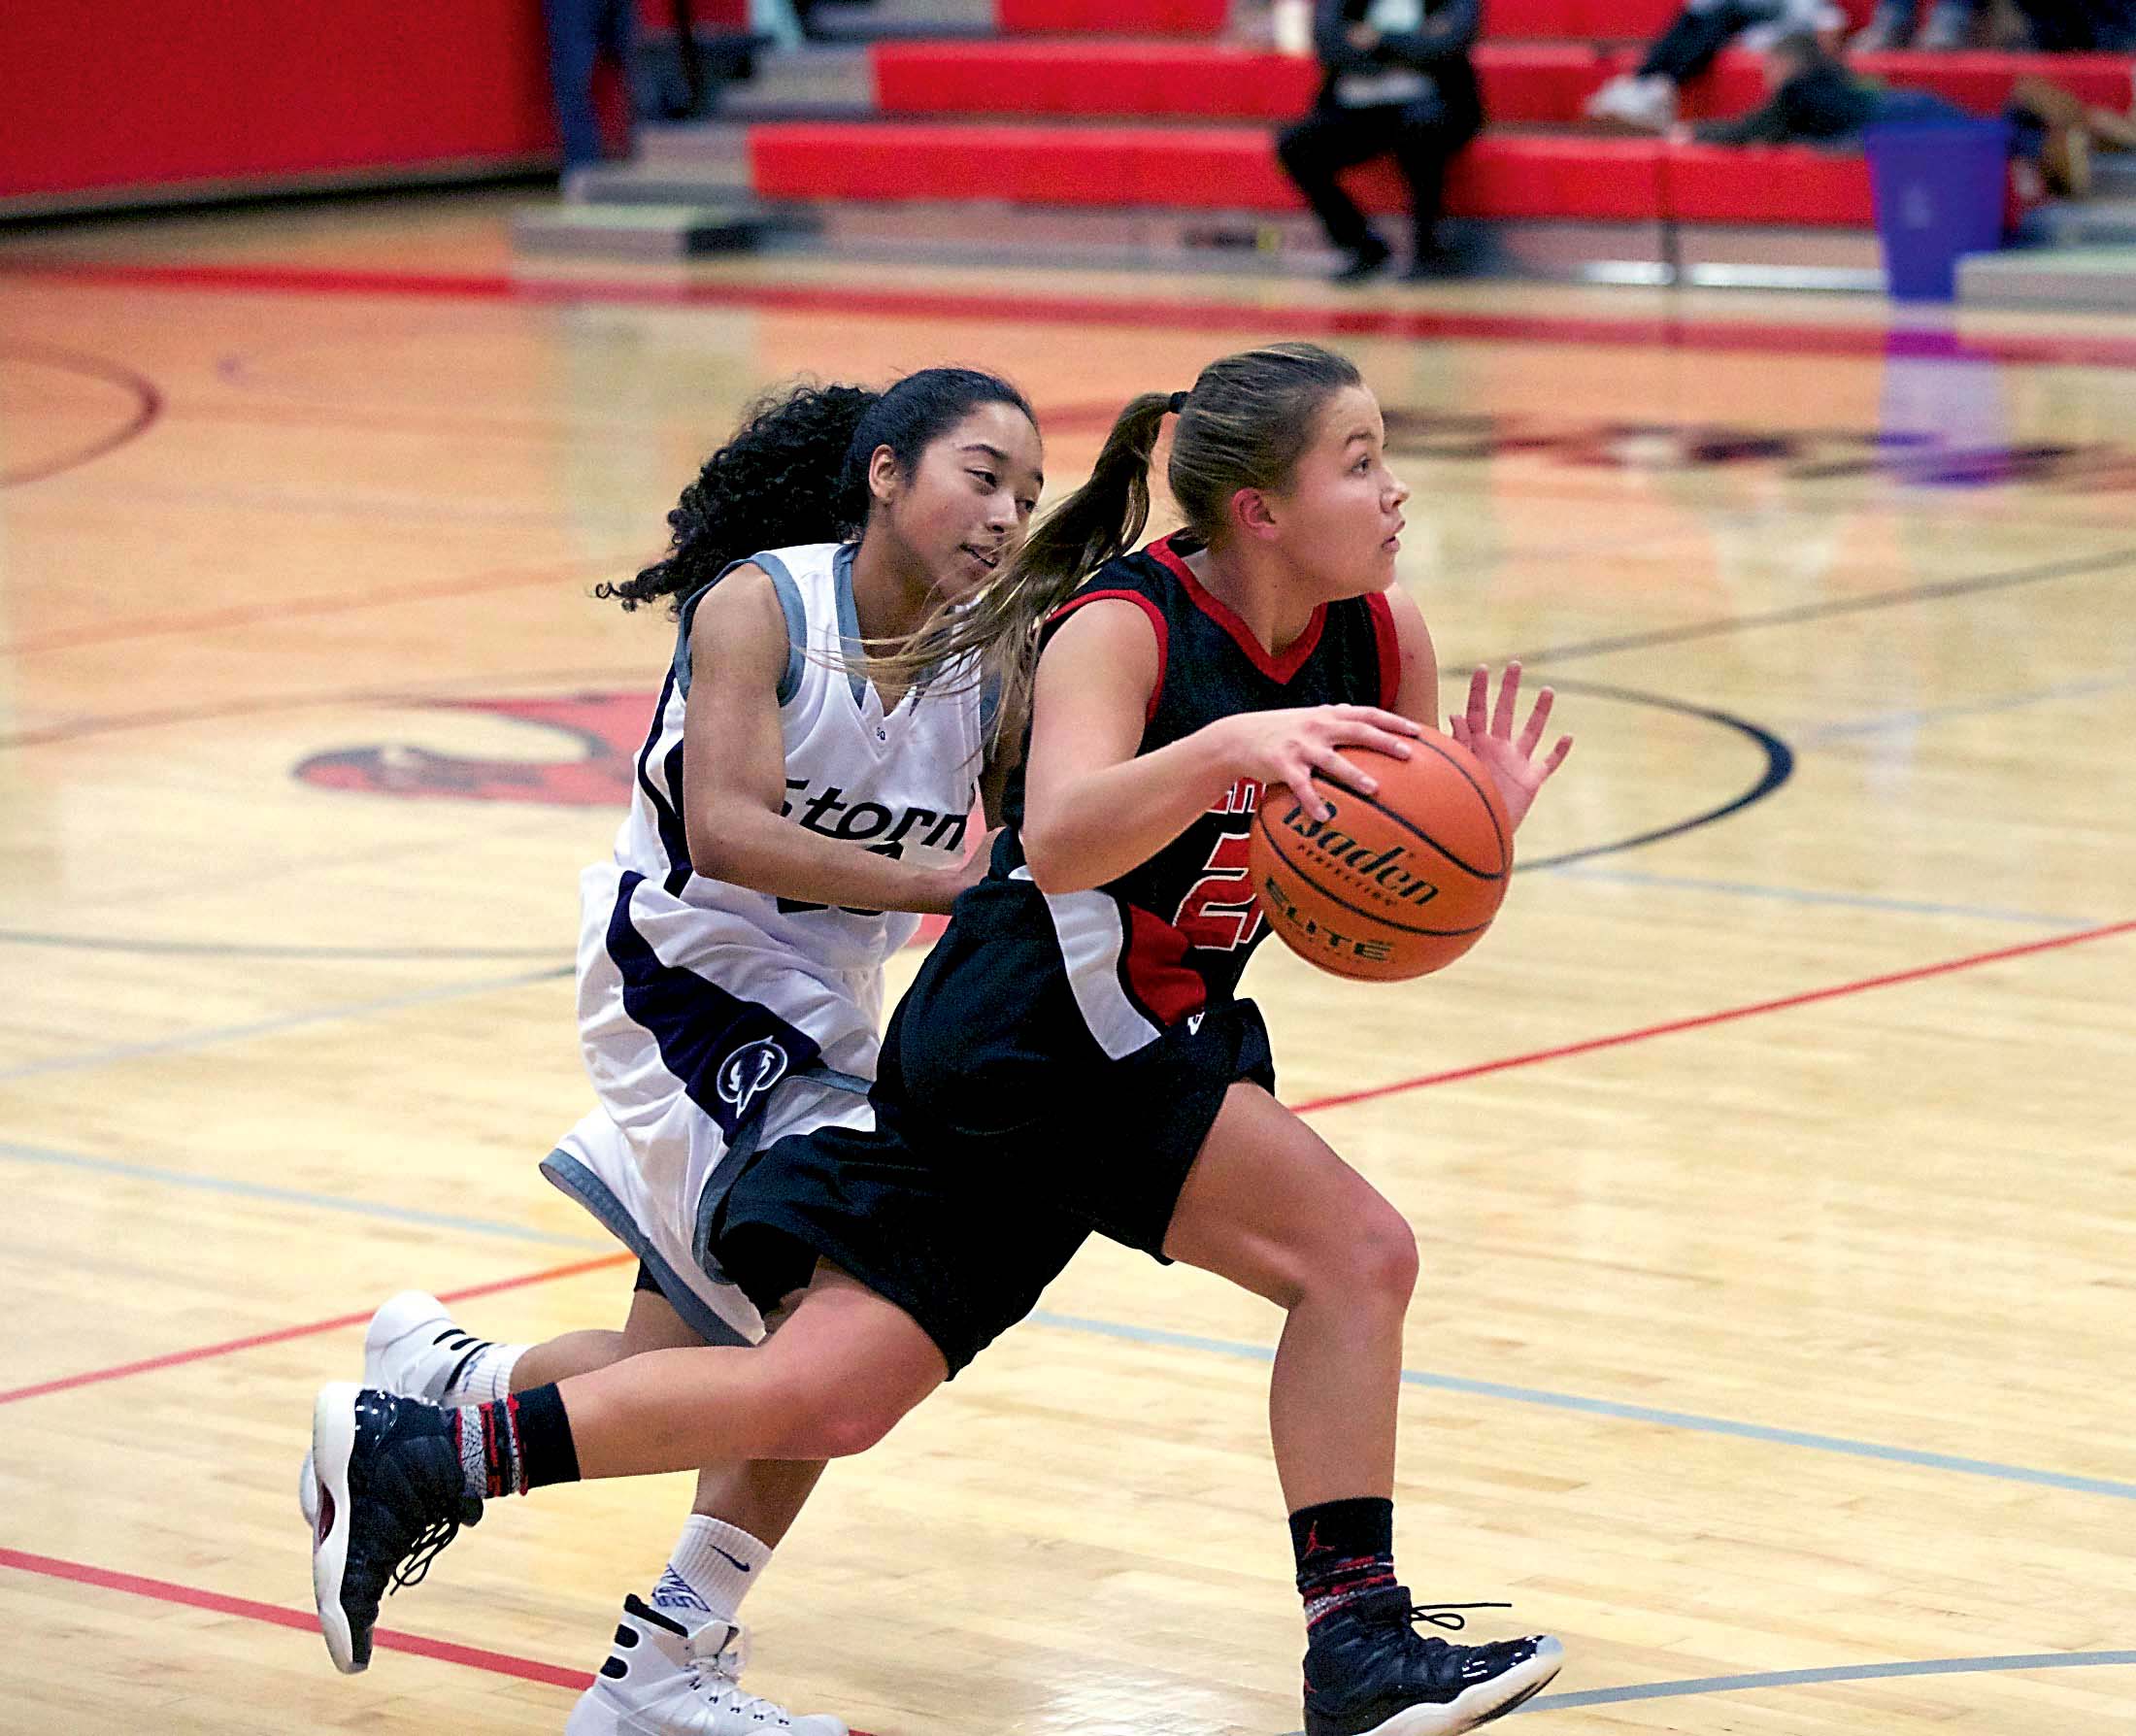 Neah Bay's Gina McCalley drives past Squalicum's Desiree Henry in Port Townsend on Tuesday. Steve Mullensky/for Peninsula Daily News